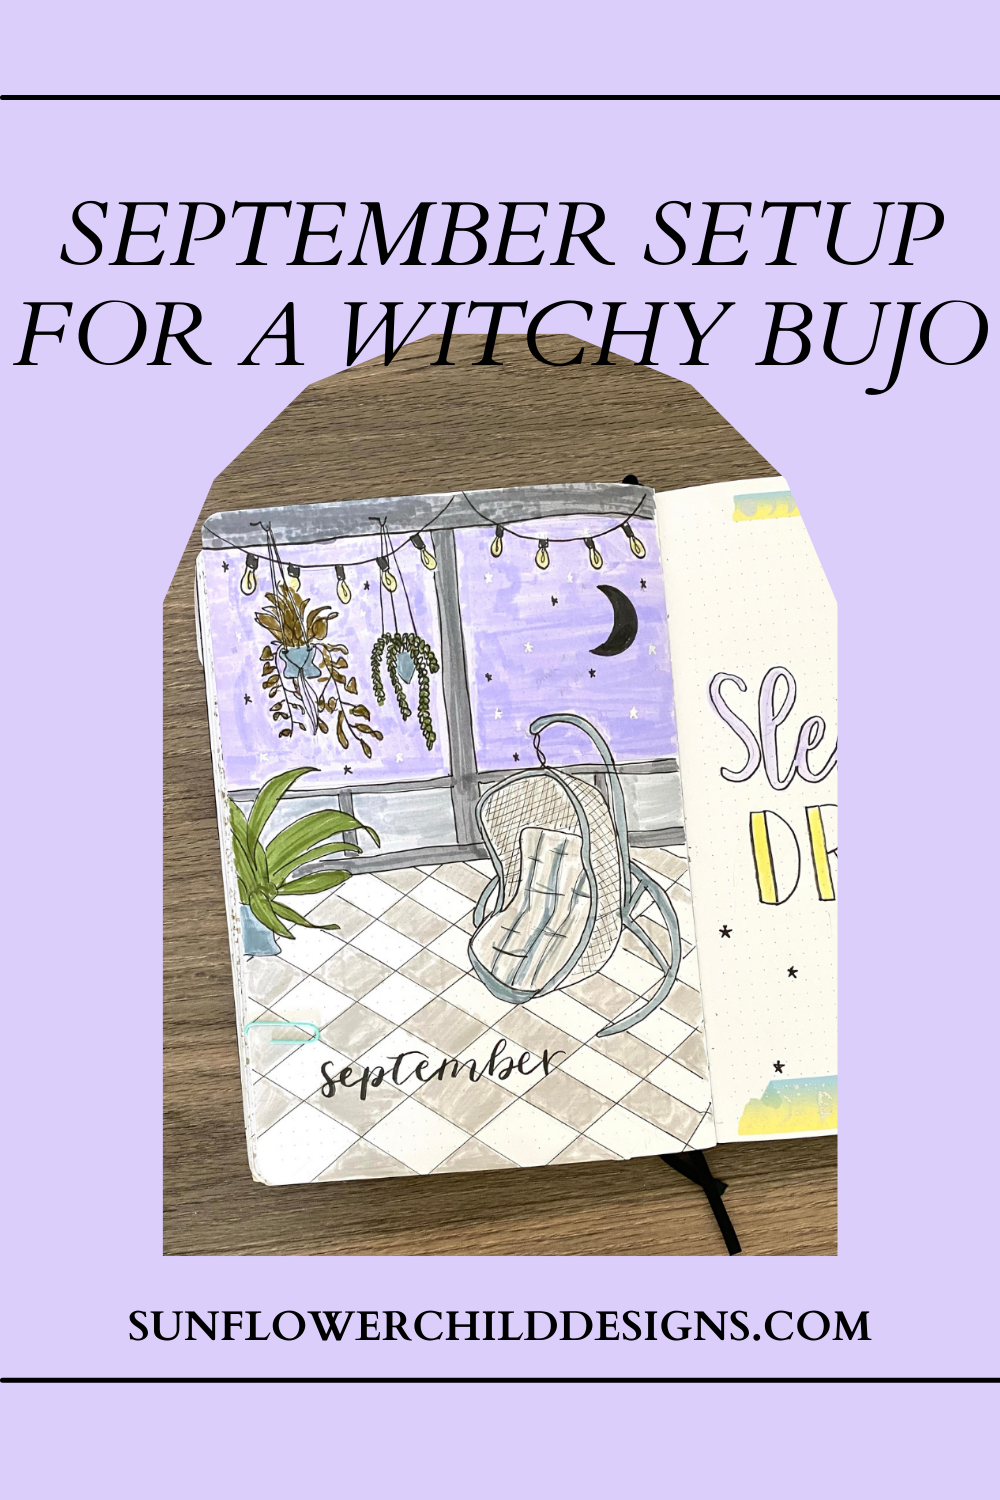 My Witchy Bullet Journal Setup